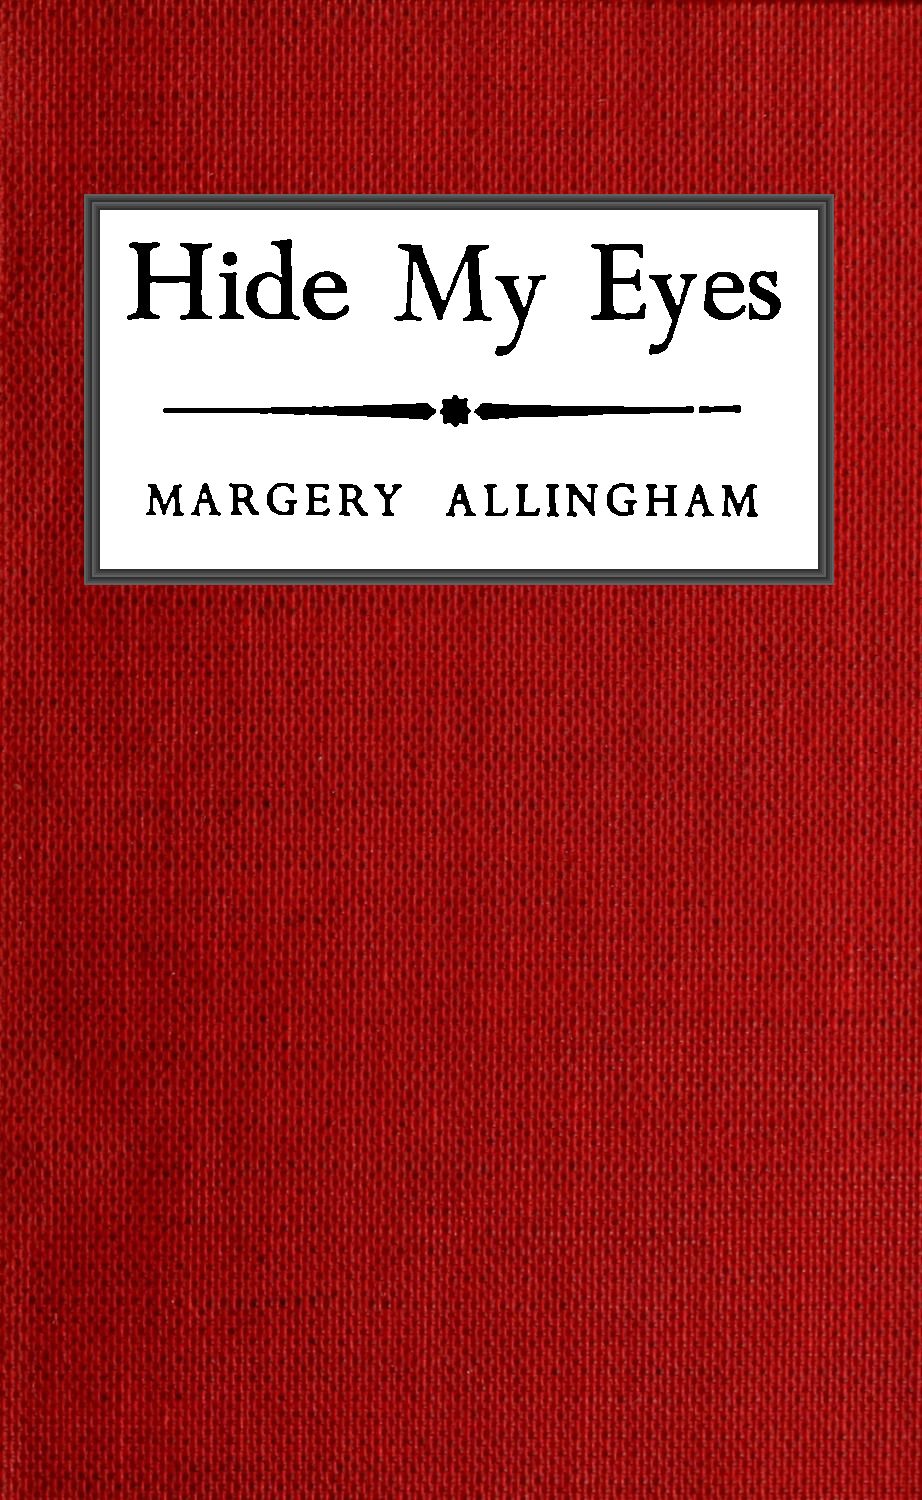 The Distributed Proofreaders Canada eBook of Hide My Eyes, by Margery  Allingham.